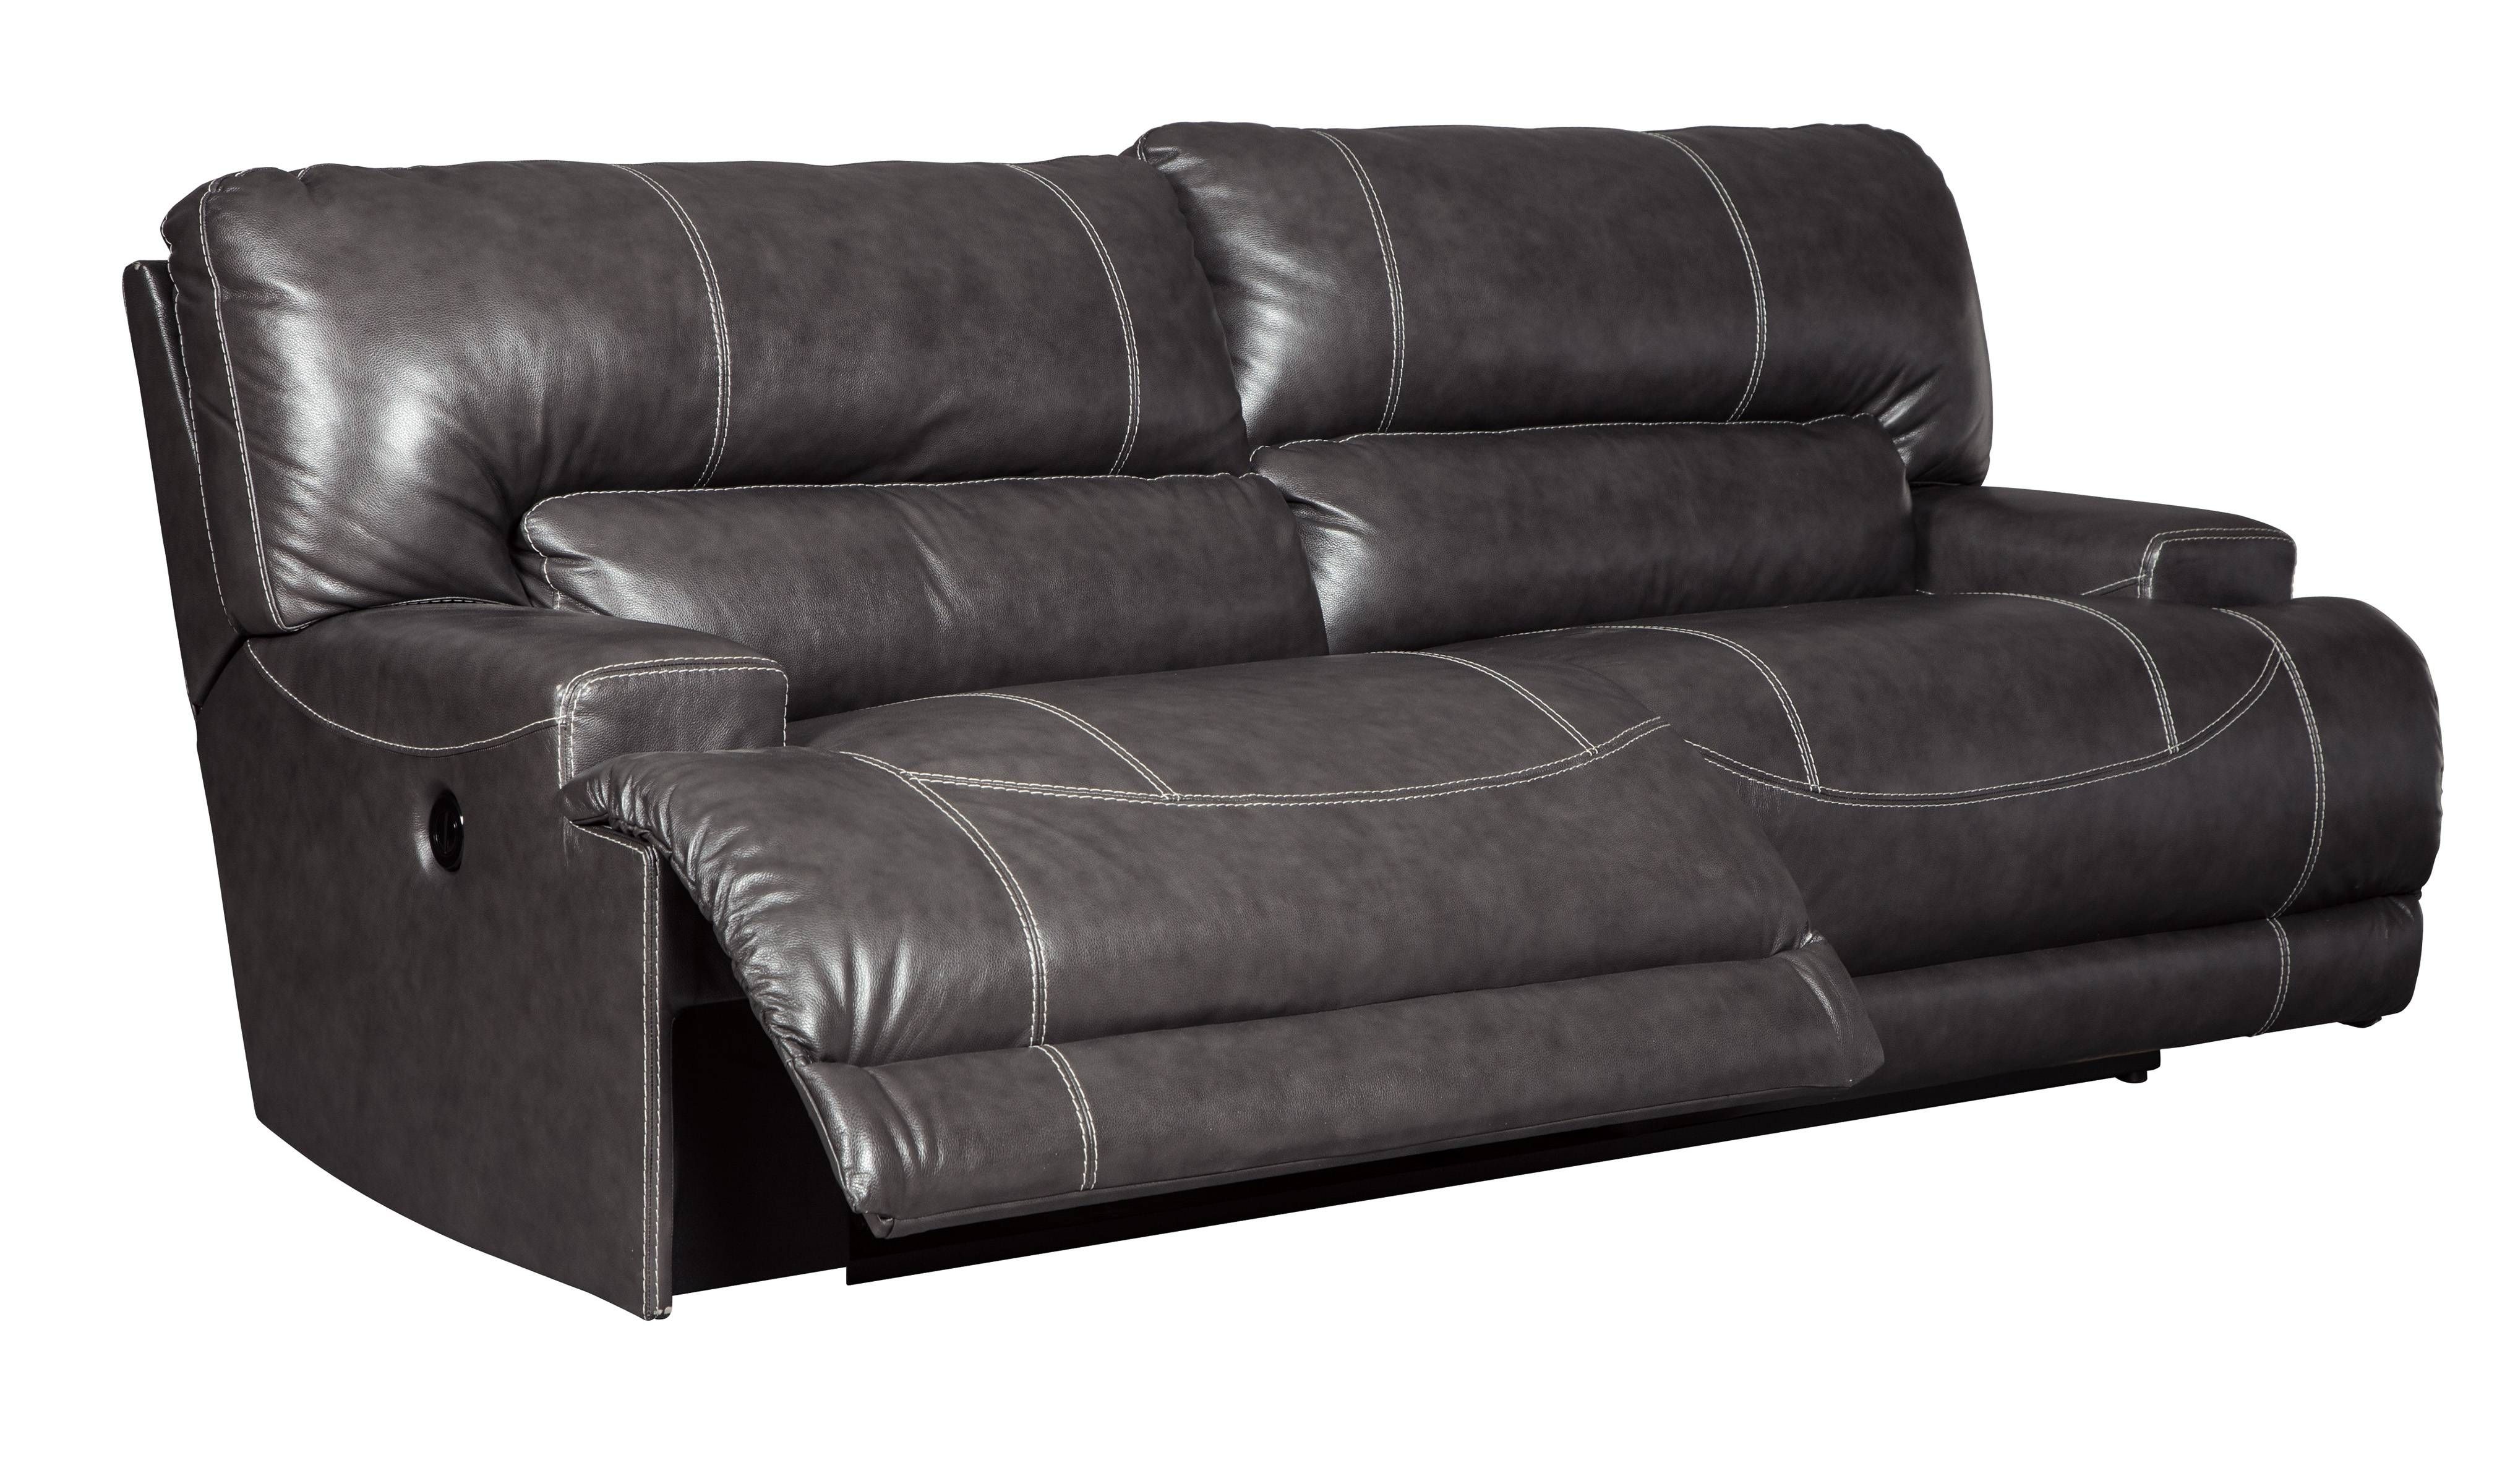 Mccaskill Contemporary Gray Leather 2 Seat Reclining Sofa | Living Throughout 2 Seat Recliner Sofas (View 15 of 30)